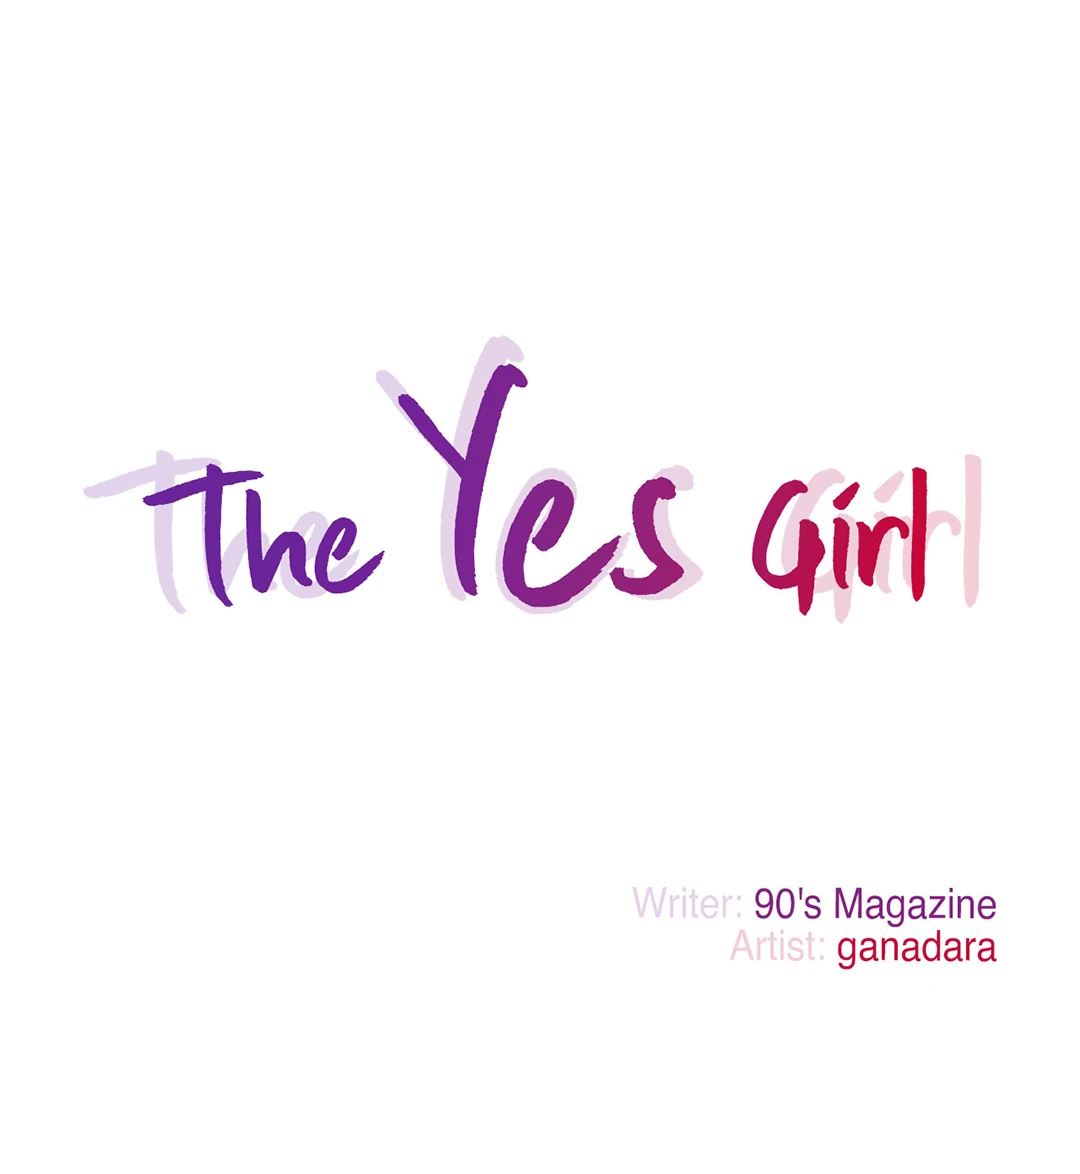 The Yes Girl image